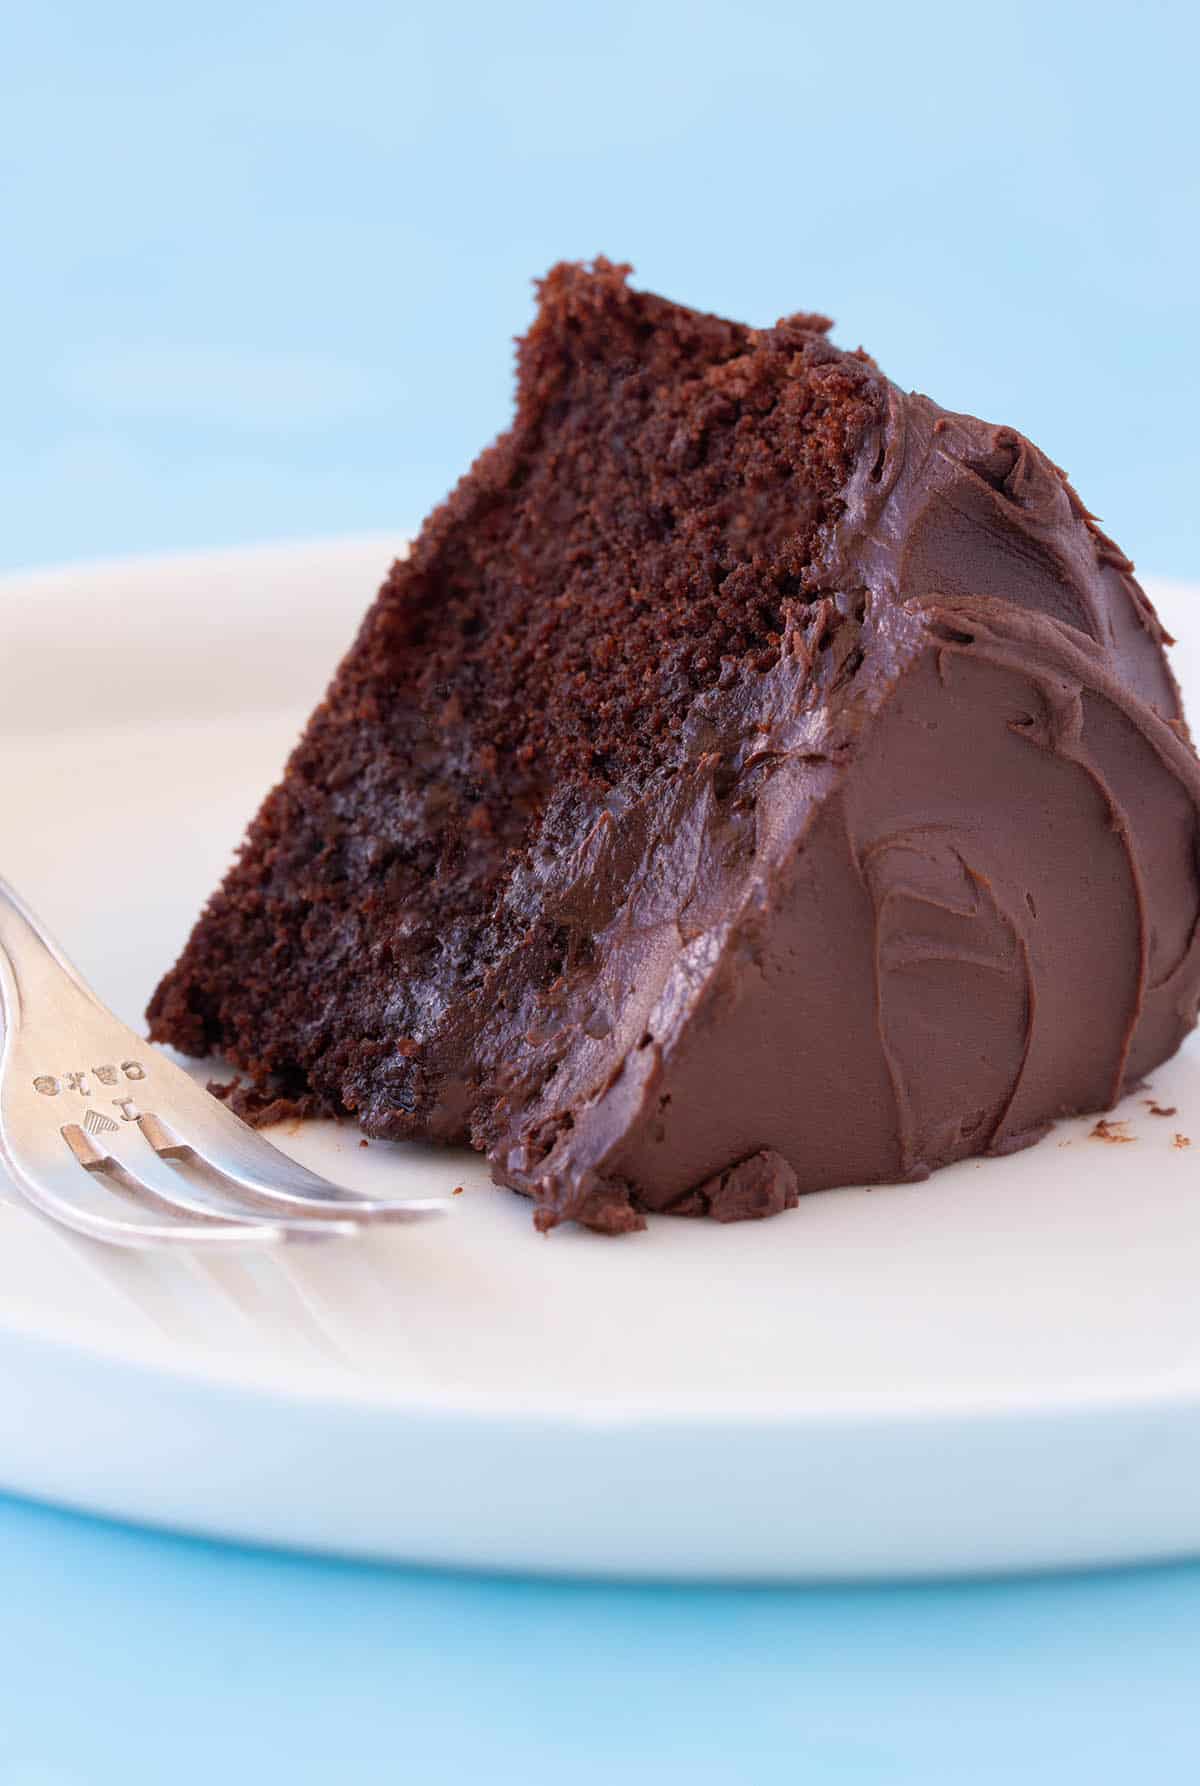 A big slice of chocolate cake topped with a thick layer of chocolate frosting sitting on a white plate